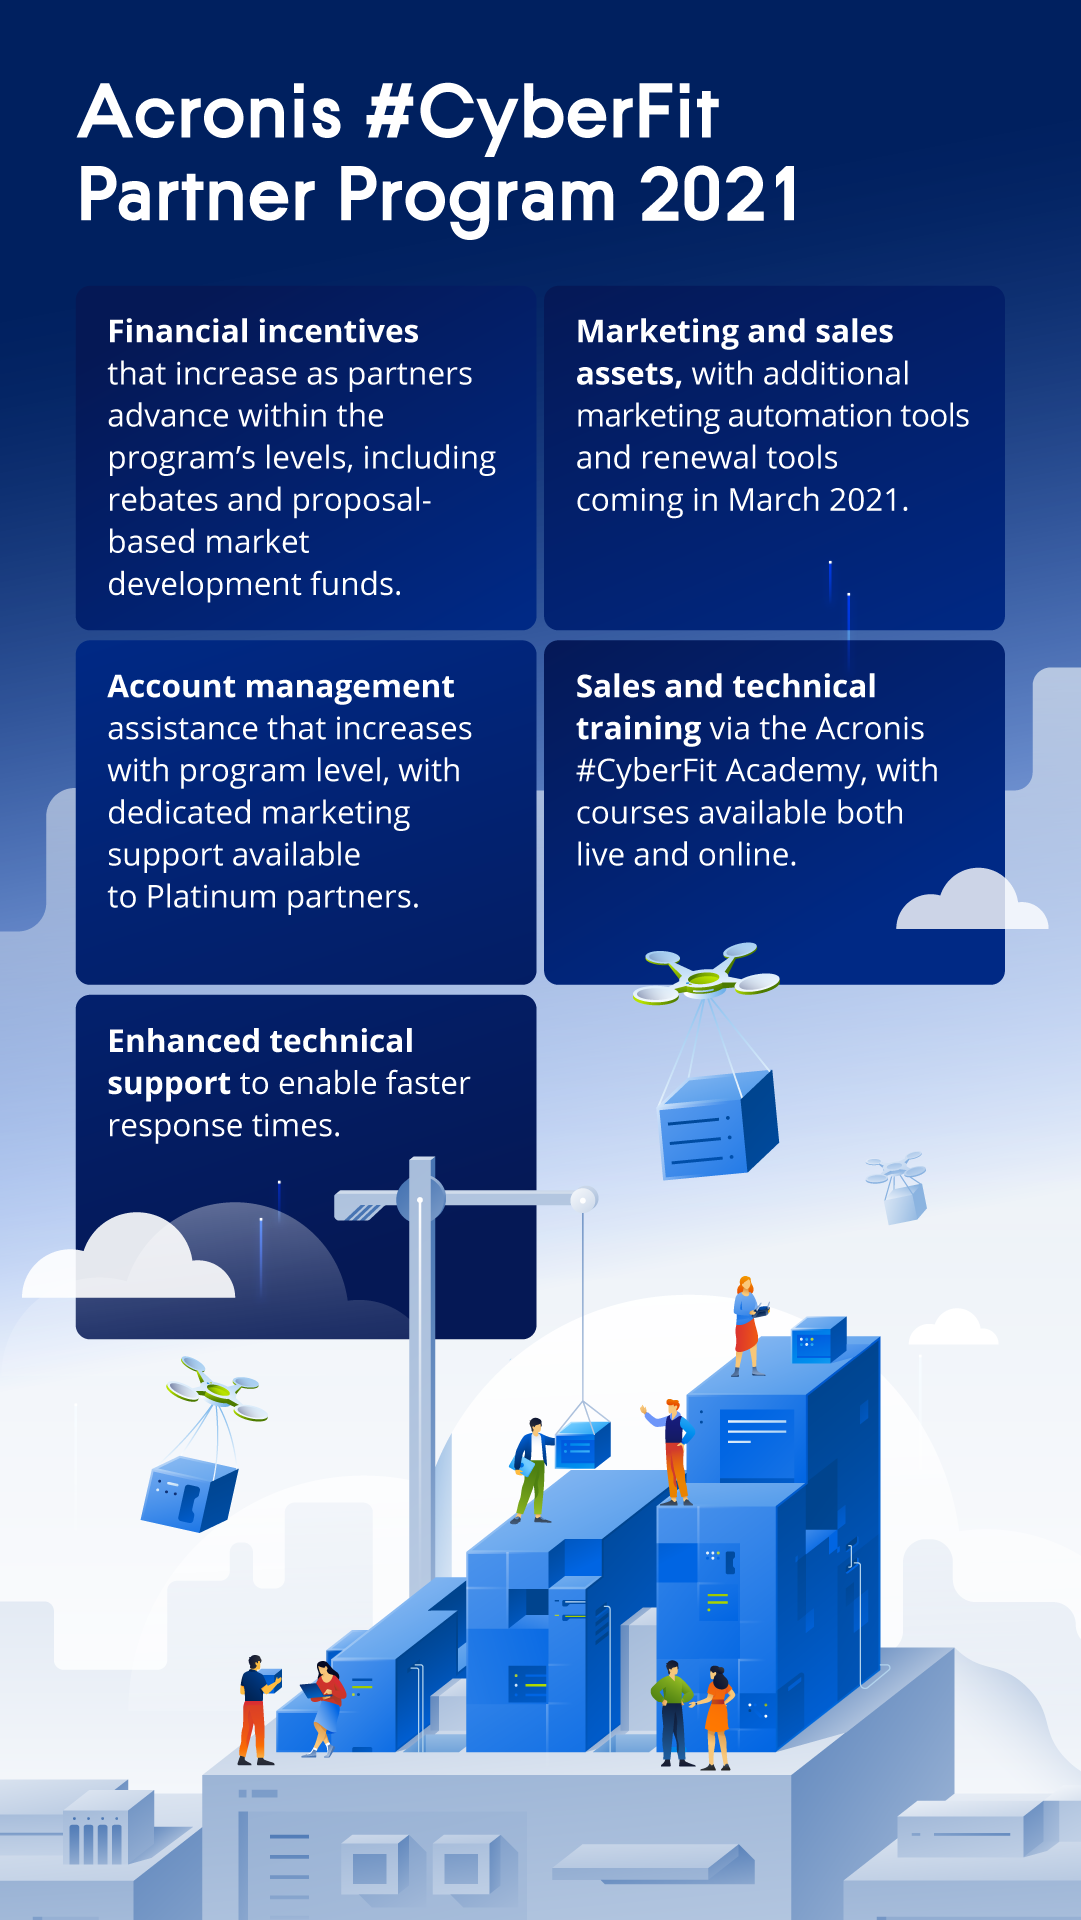 Acronis empowers resellers and service providers with new cloud-focused #CyberFit Partner Program